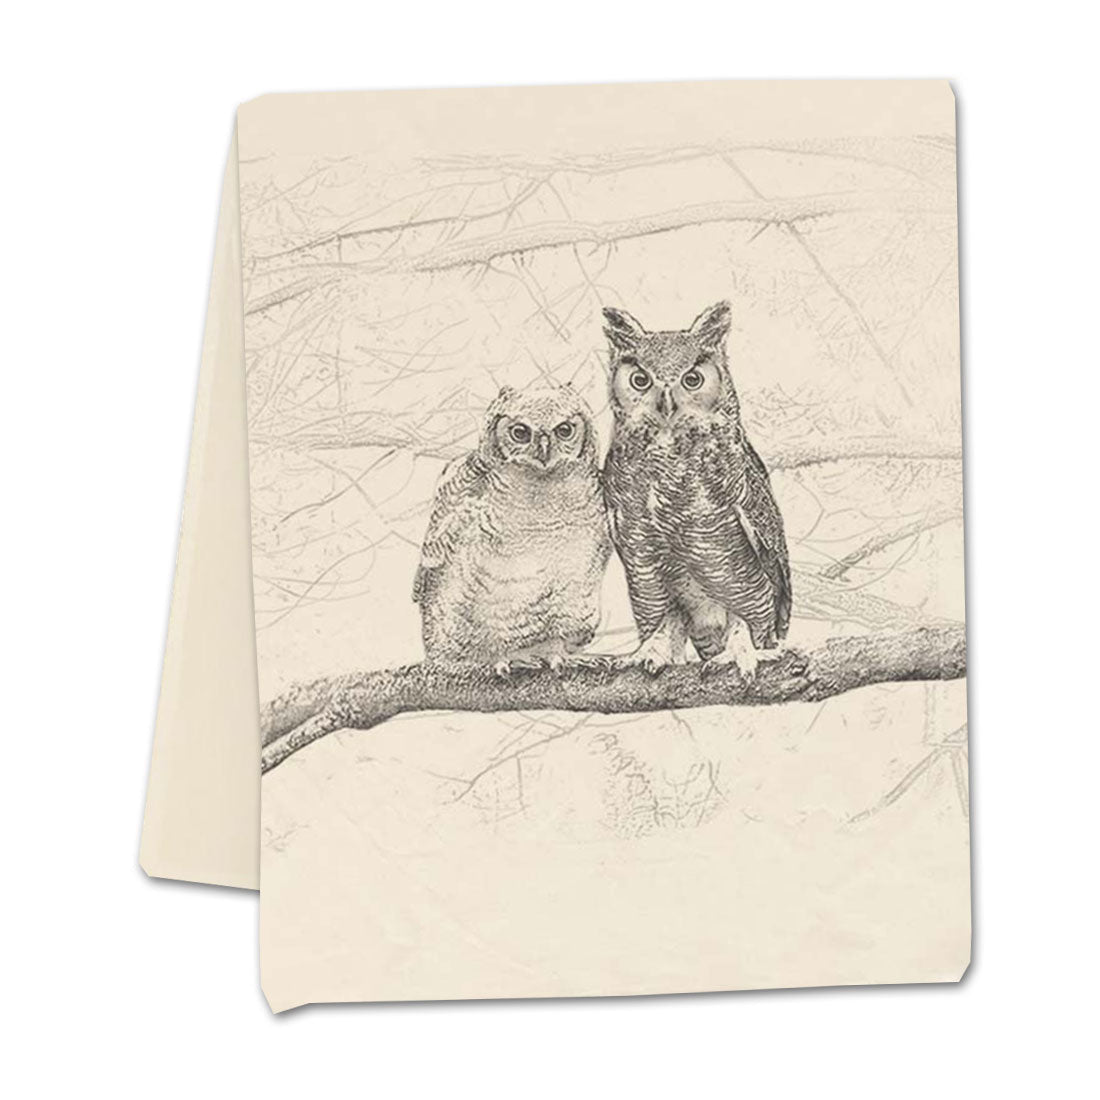 Evening Owls Kitchen Towel by Eric & Christopher